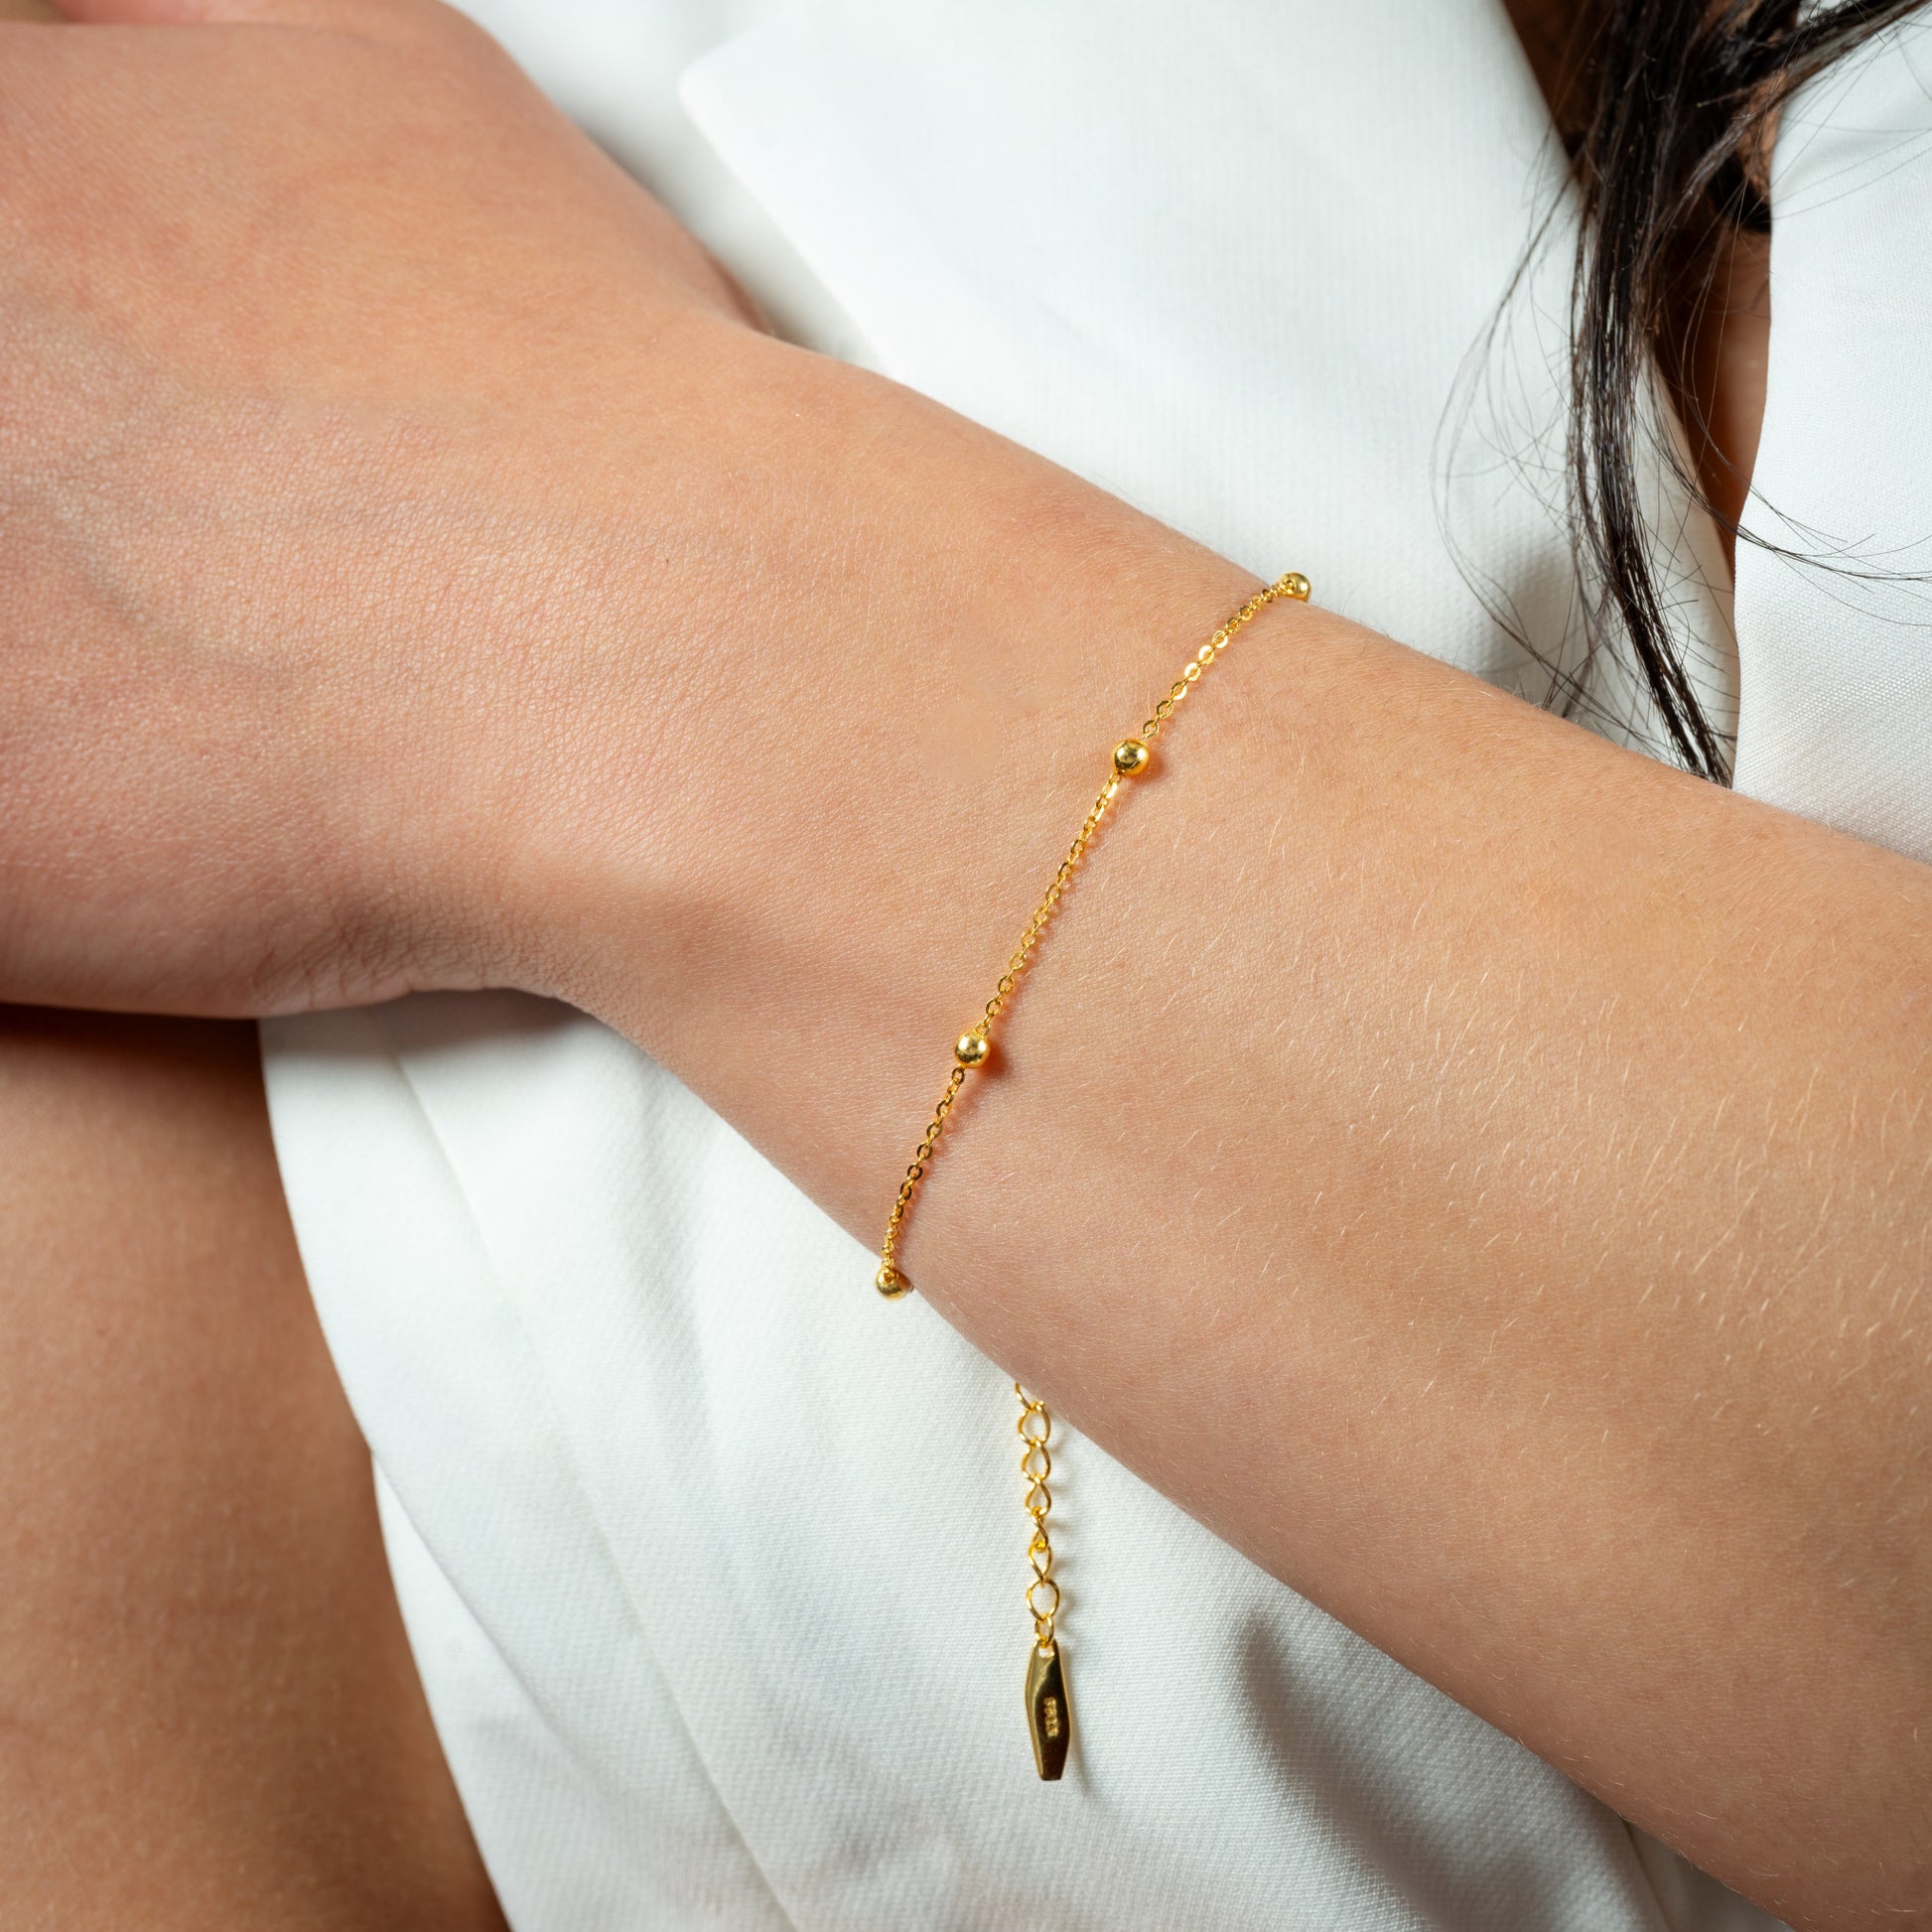 A model wearing Bead Chain Gold Bracelet on her hand. Zoomed view.